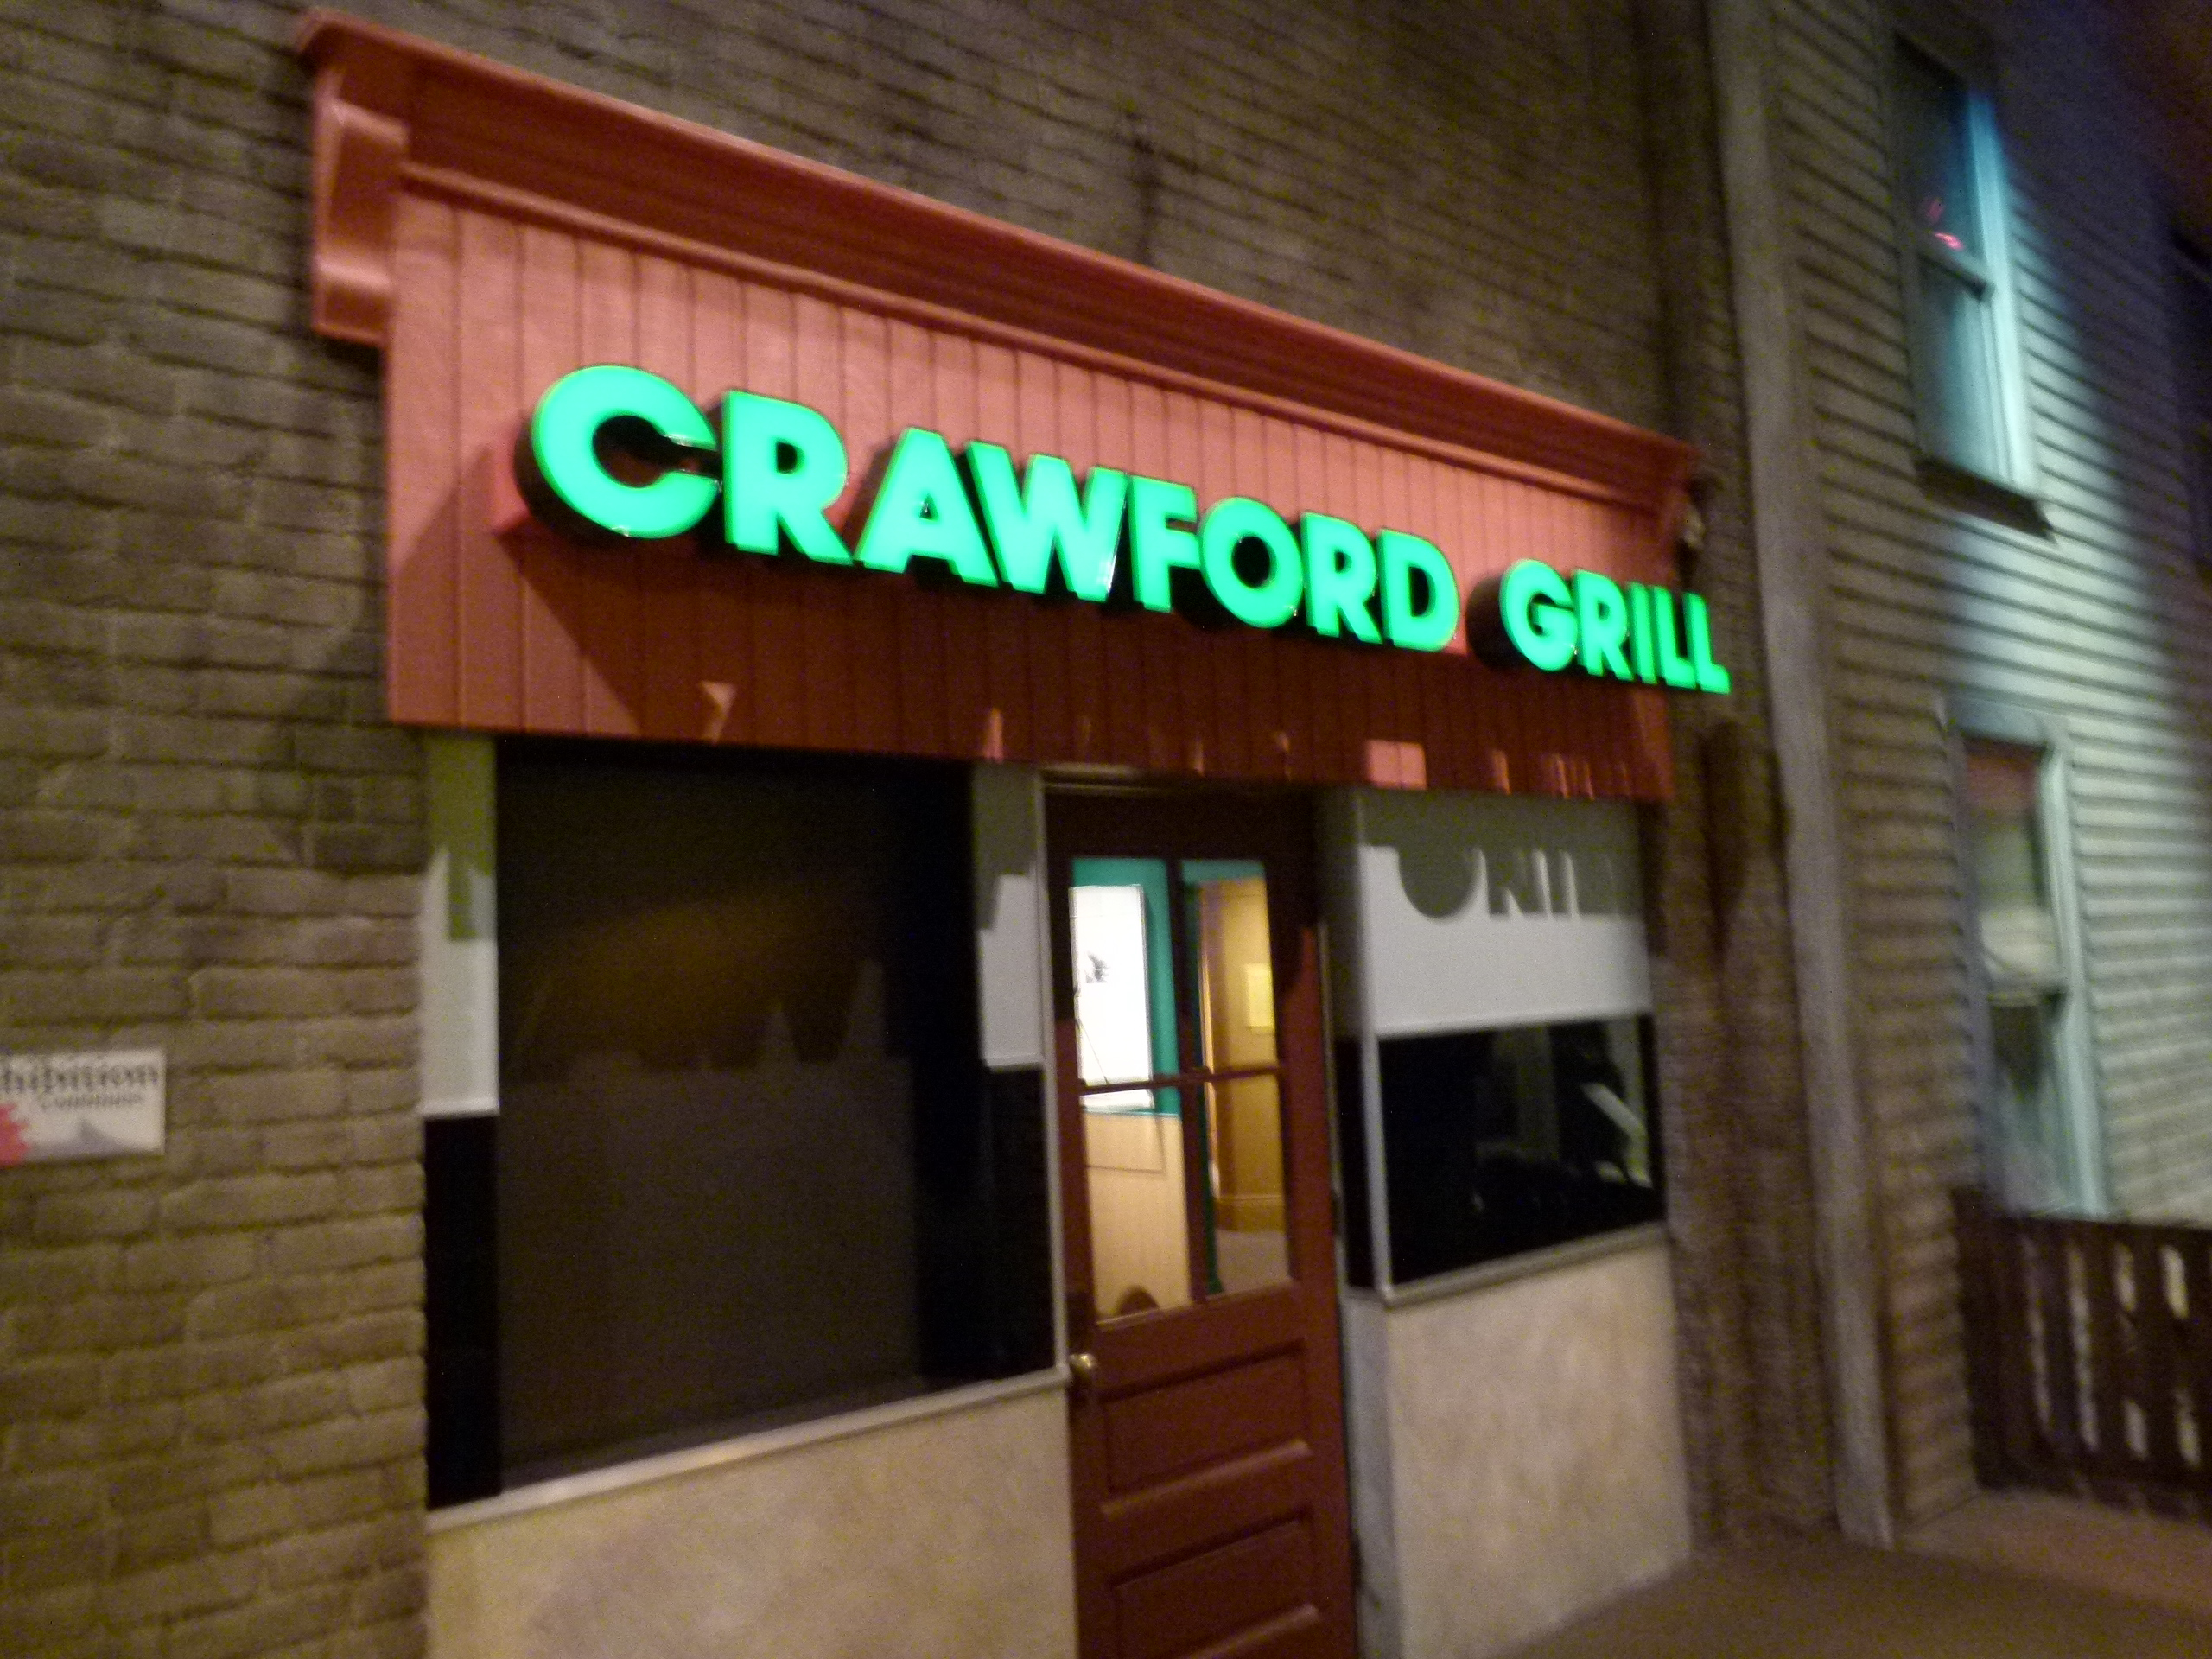 The exterior facade of the legendary Crawford Grill jazz club in Pittsburgh's Hill District.